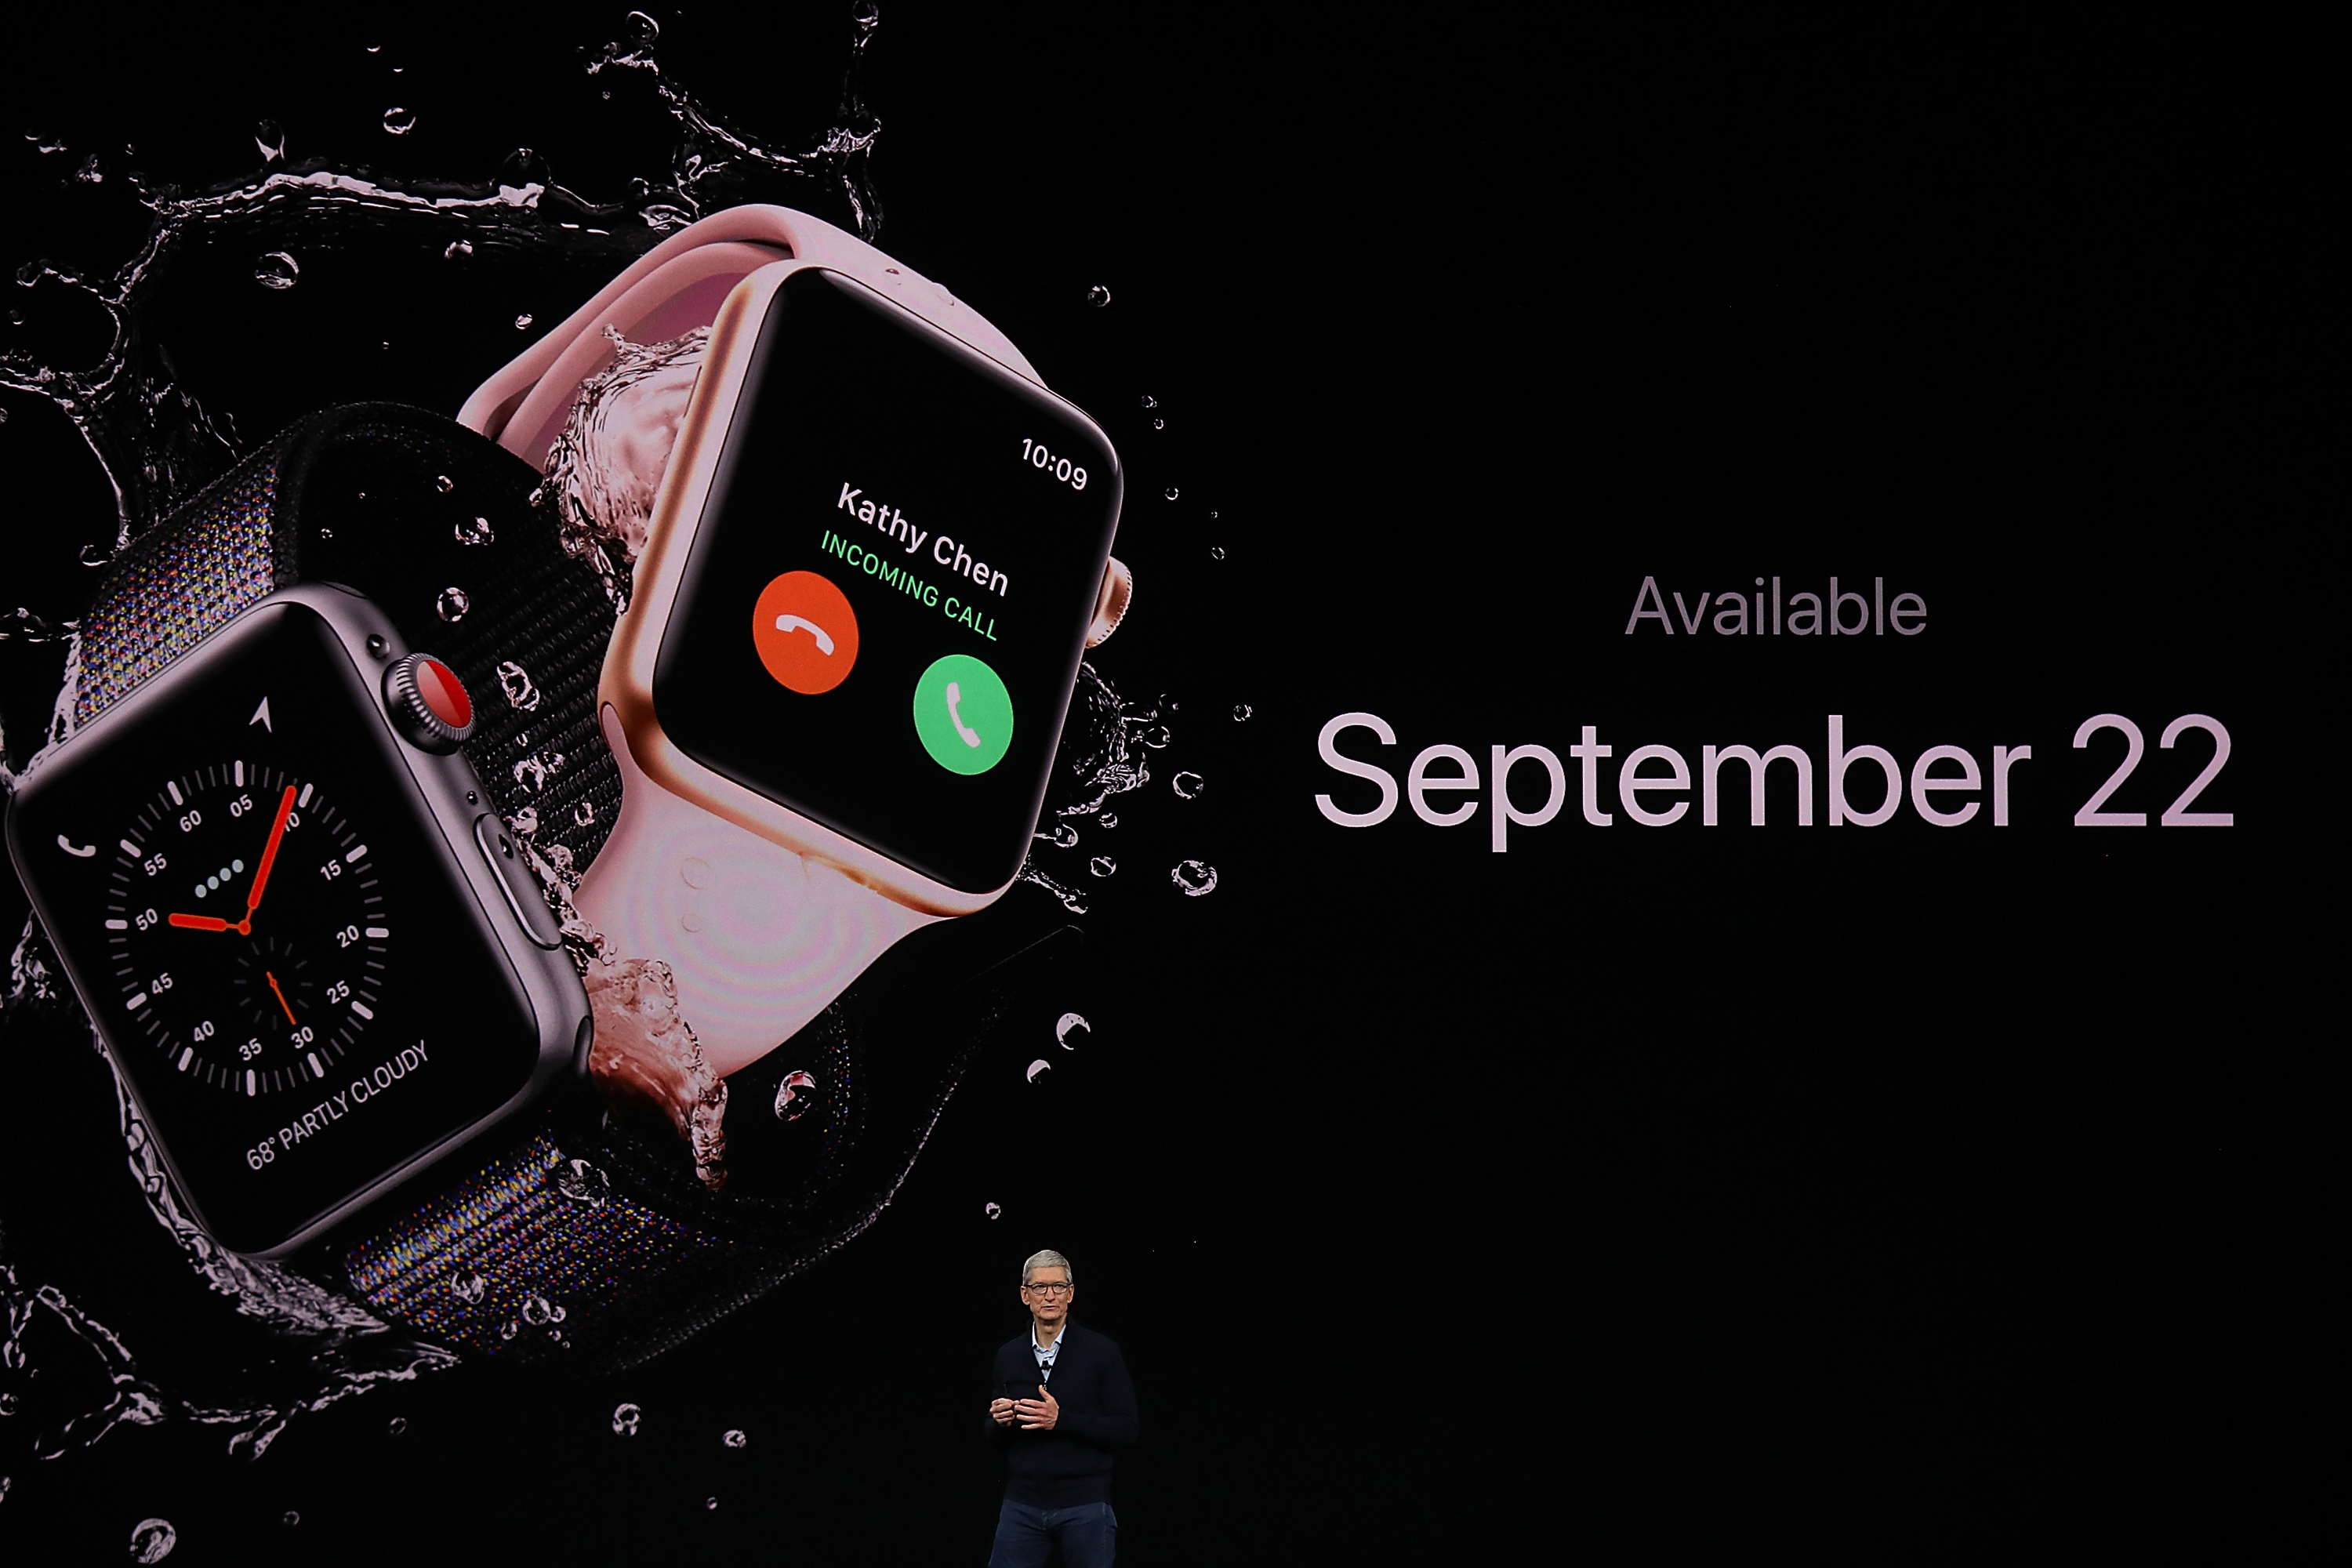 The new Apple Watch Series 3.